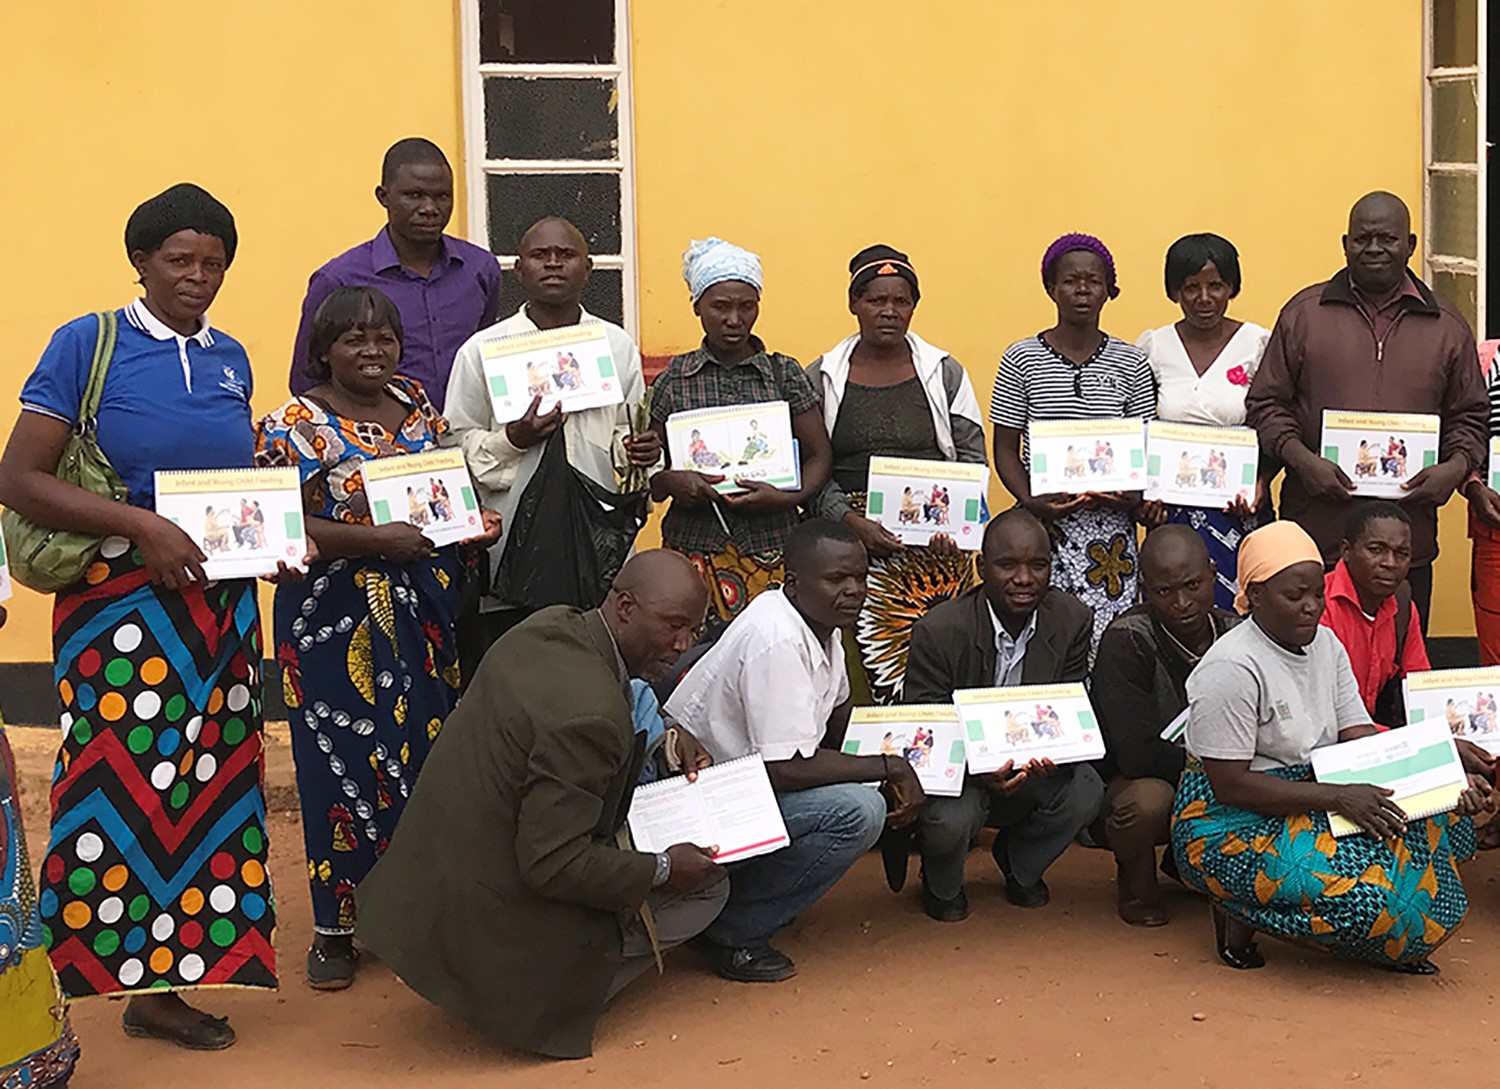 Nutrition training participants with their training manuals; the man wearing a white shirt standing in front of the window can be seen holding his chaya cuttings.